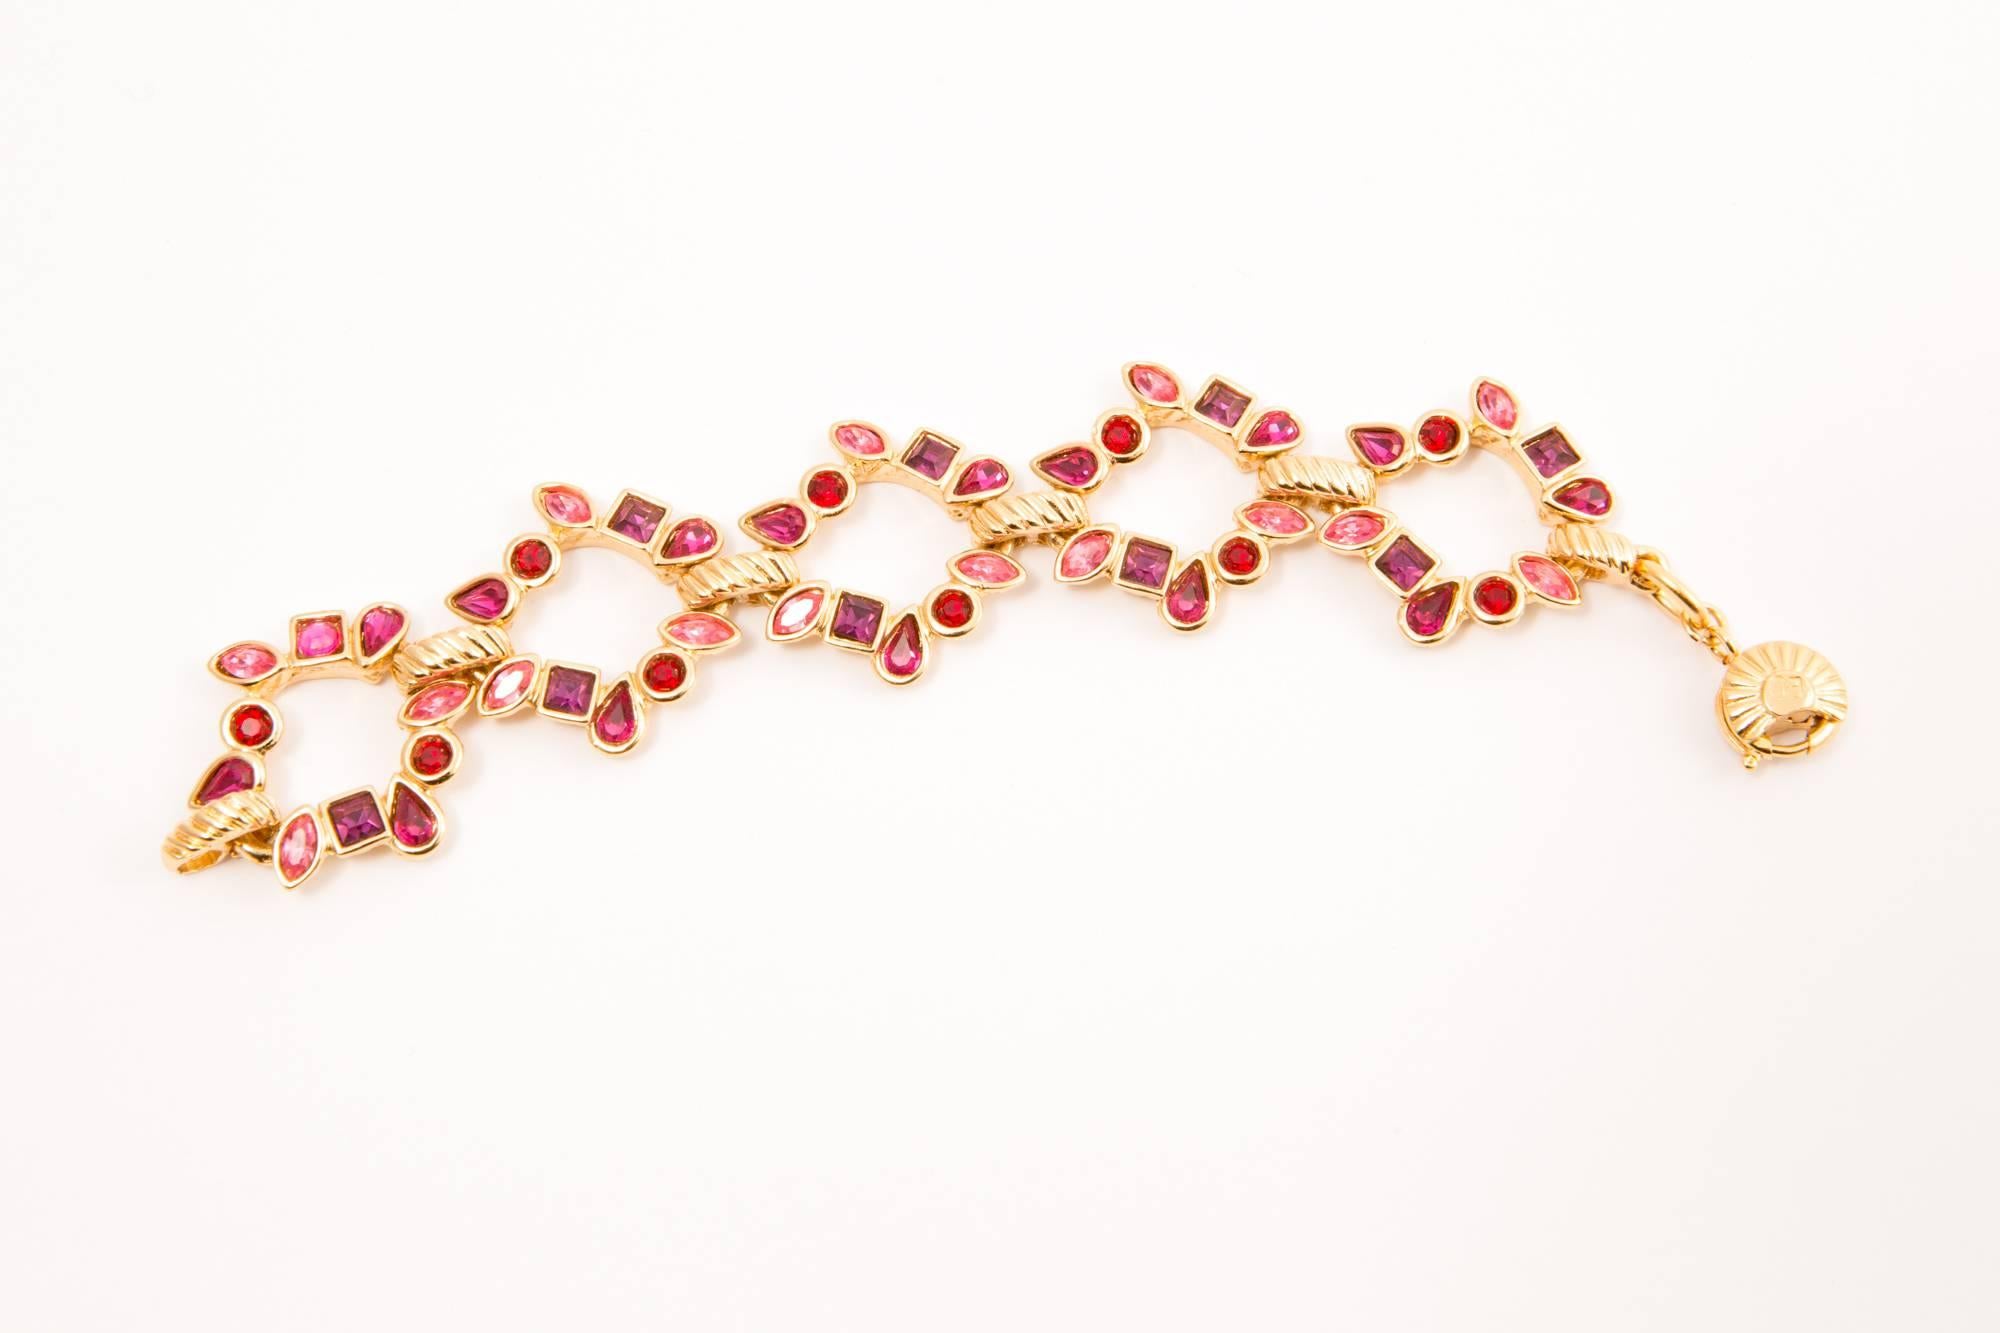 Yves Saint Laurent red, pink glass strass bracelet featuring gold tone articulated parts and a spring-ring fastening with logo pitted on.
In excellent vintage condition. Made in France.
Length open 7,4in. (19cm)
Width 1.18in. (3cm) 
We guarantee you